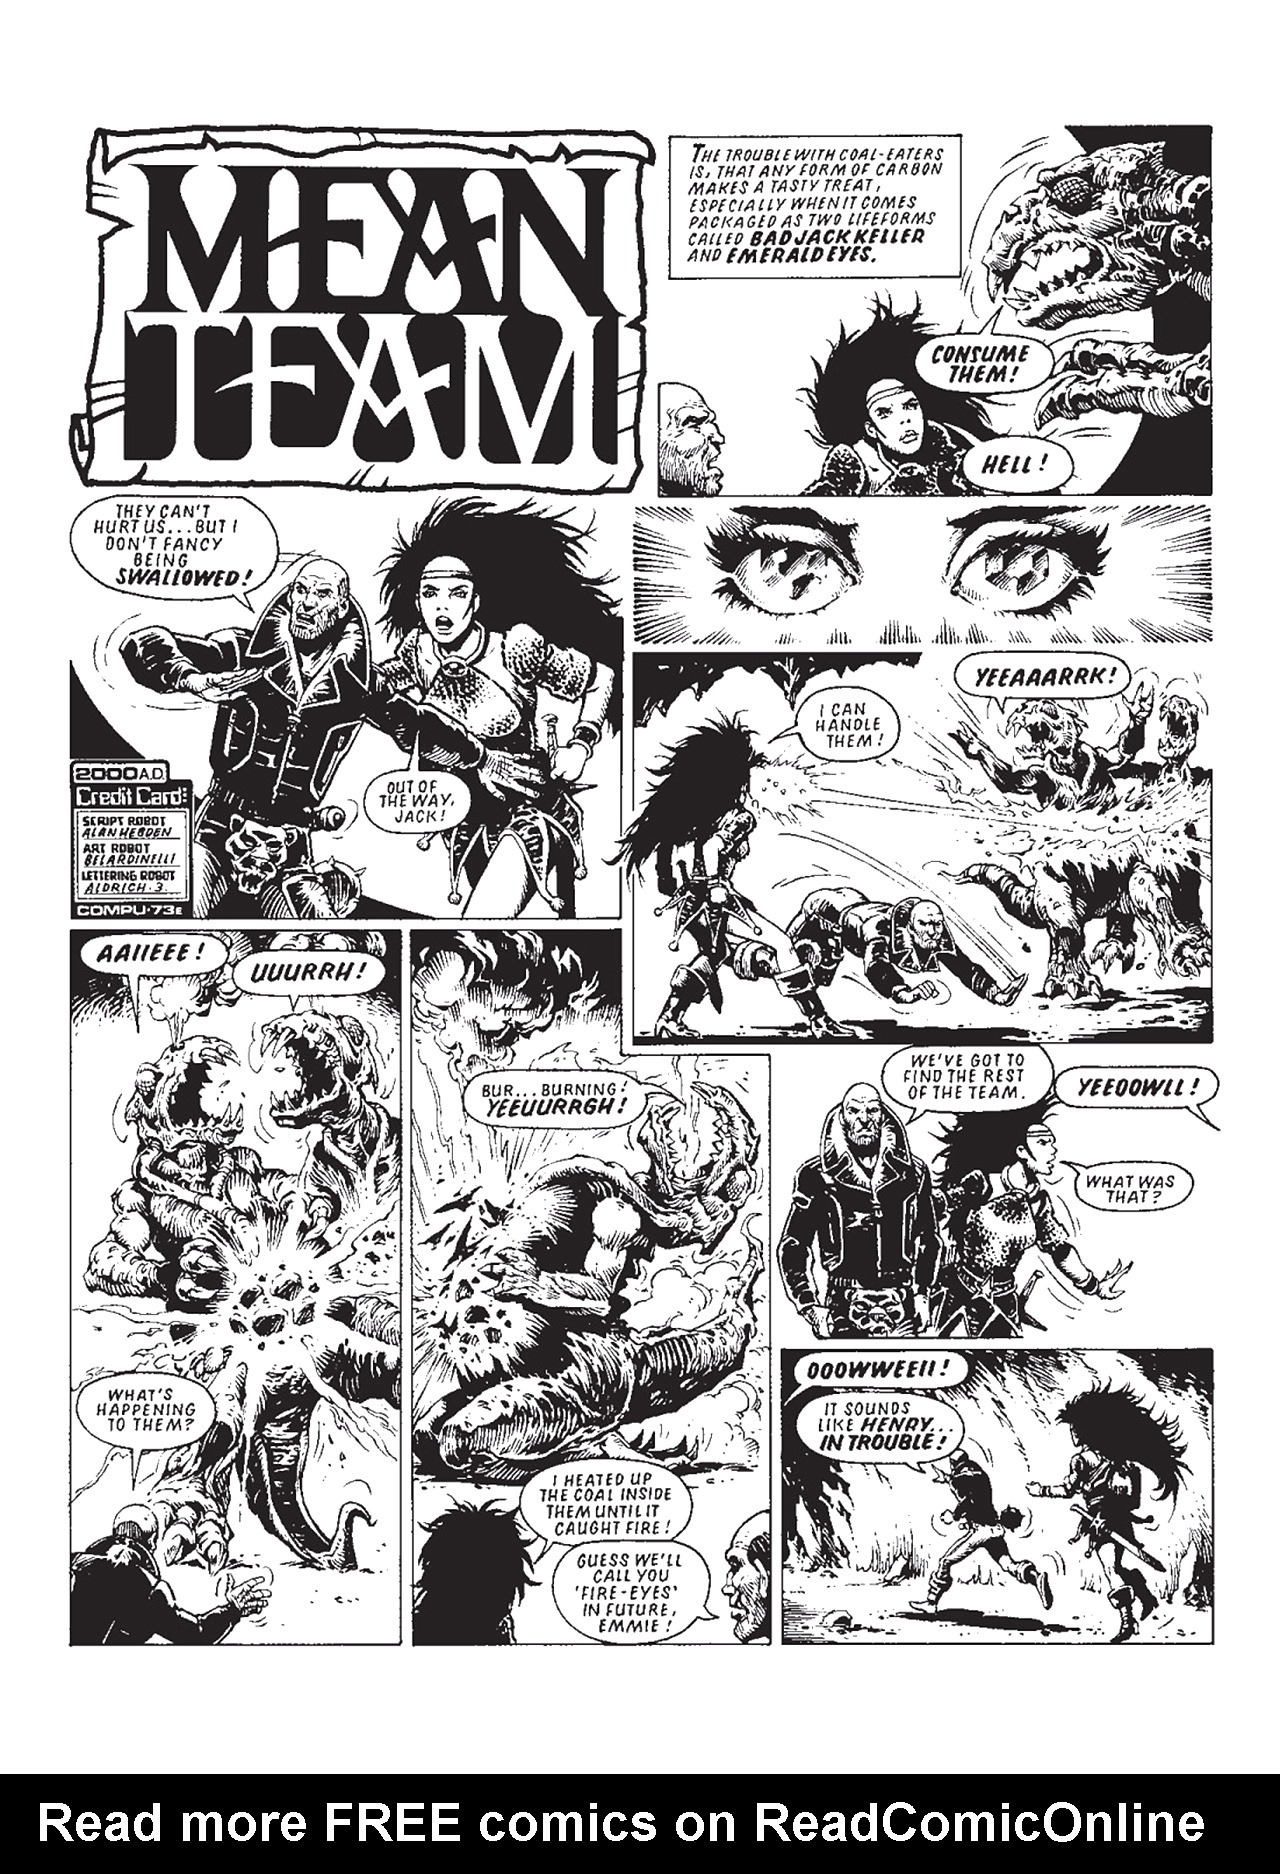 Read online Mean Team comic -  Issue # TPB - 159